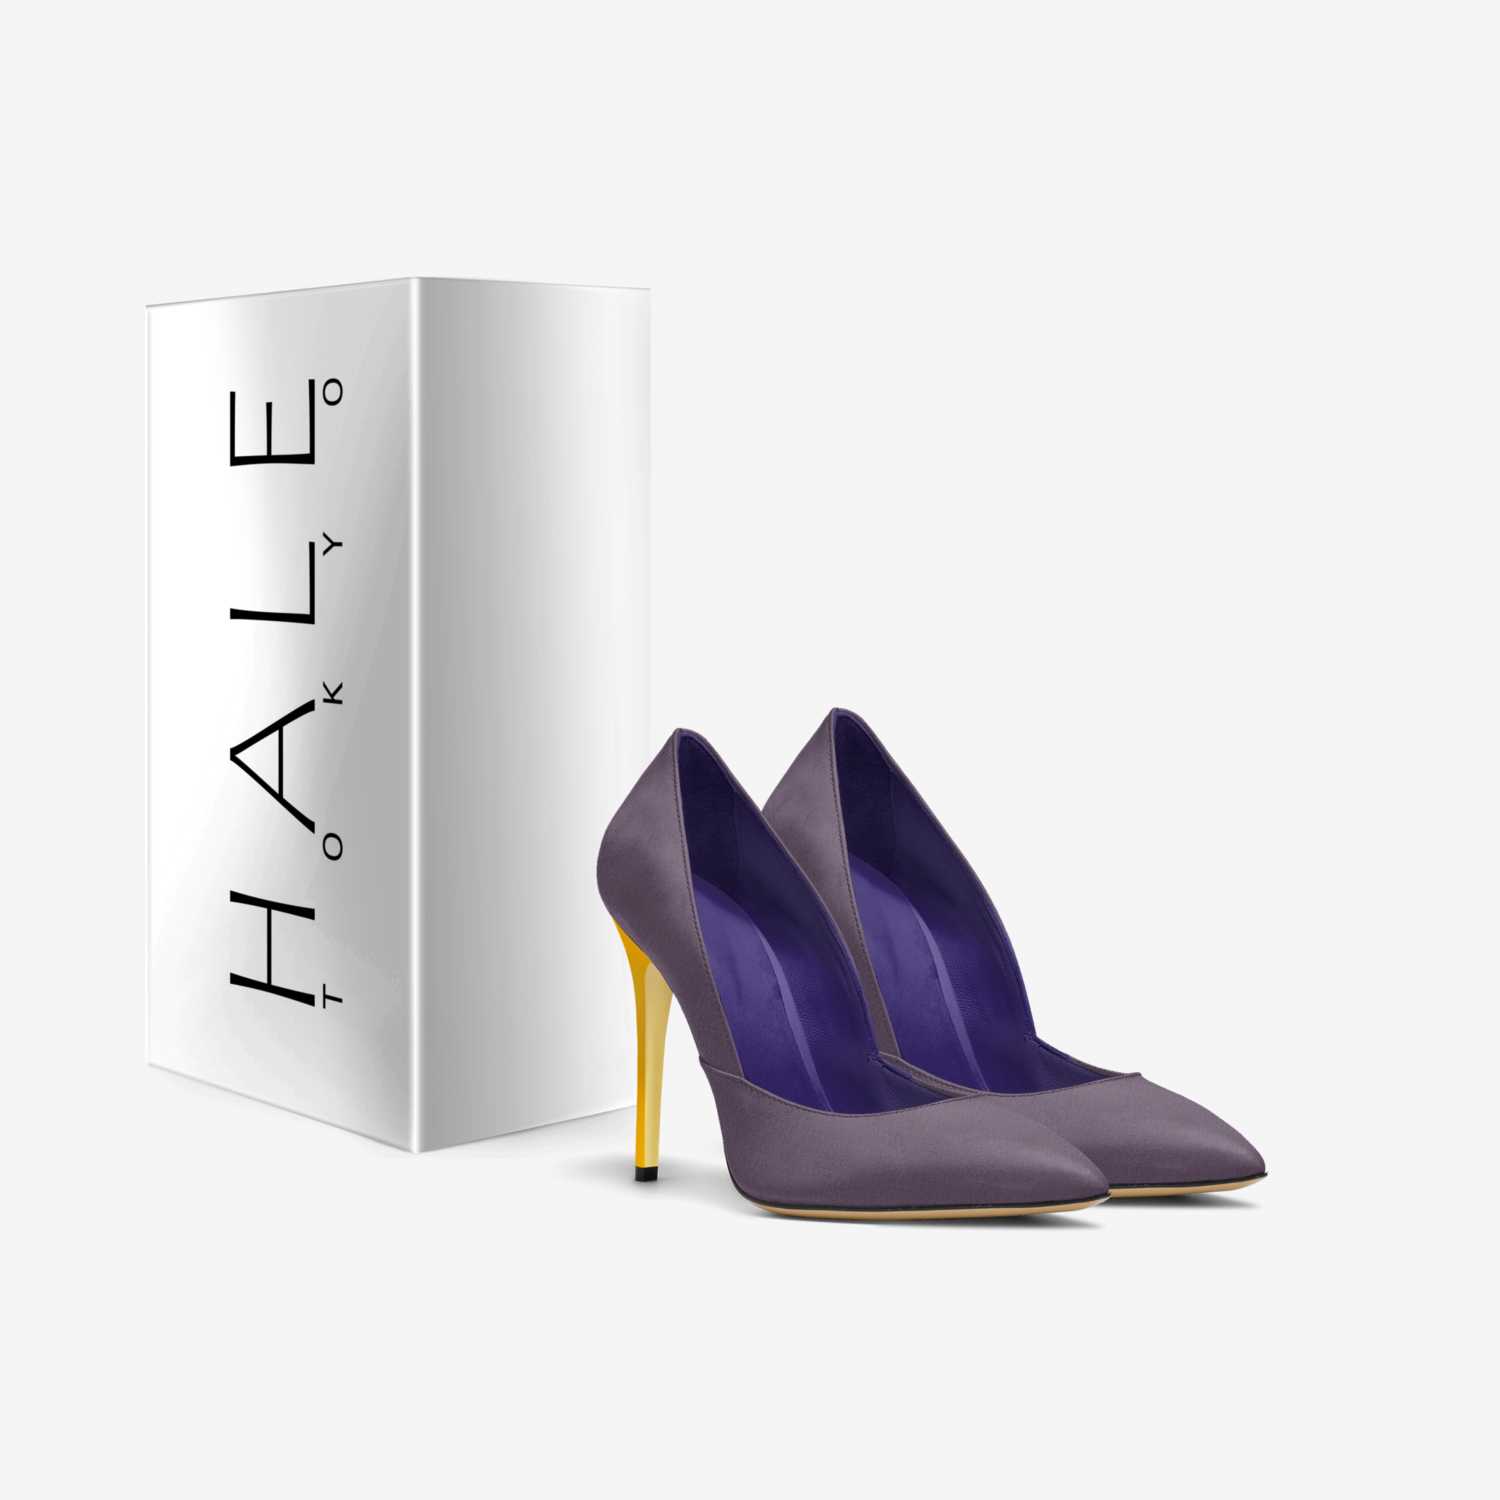 HALE Tokyo custom made in Italy shoes by Sayaka Ono | Box view